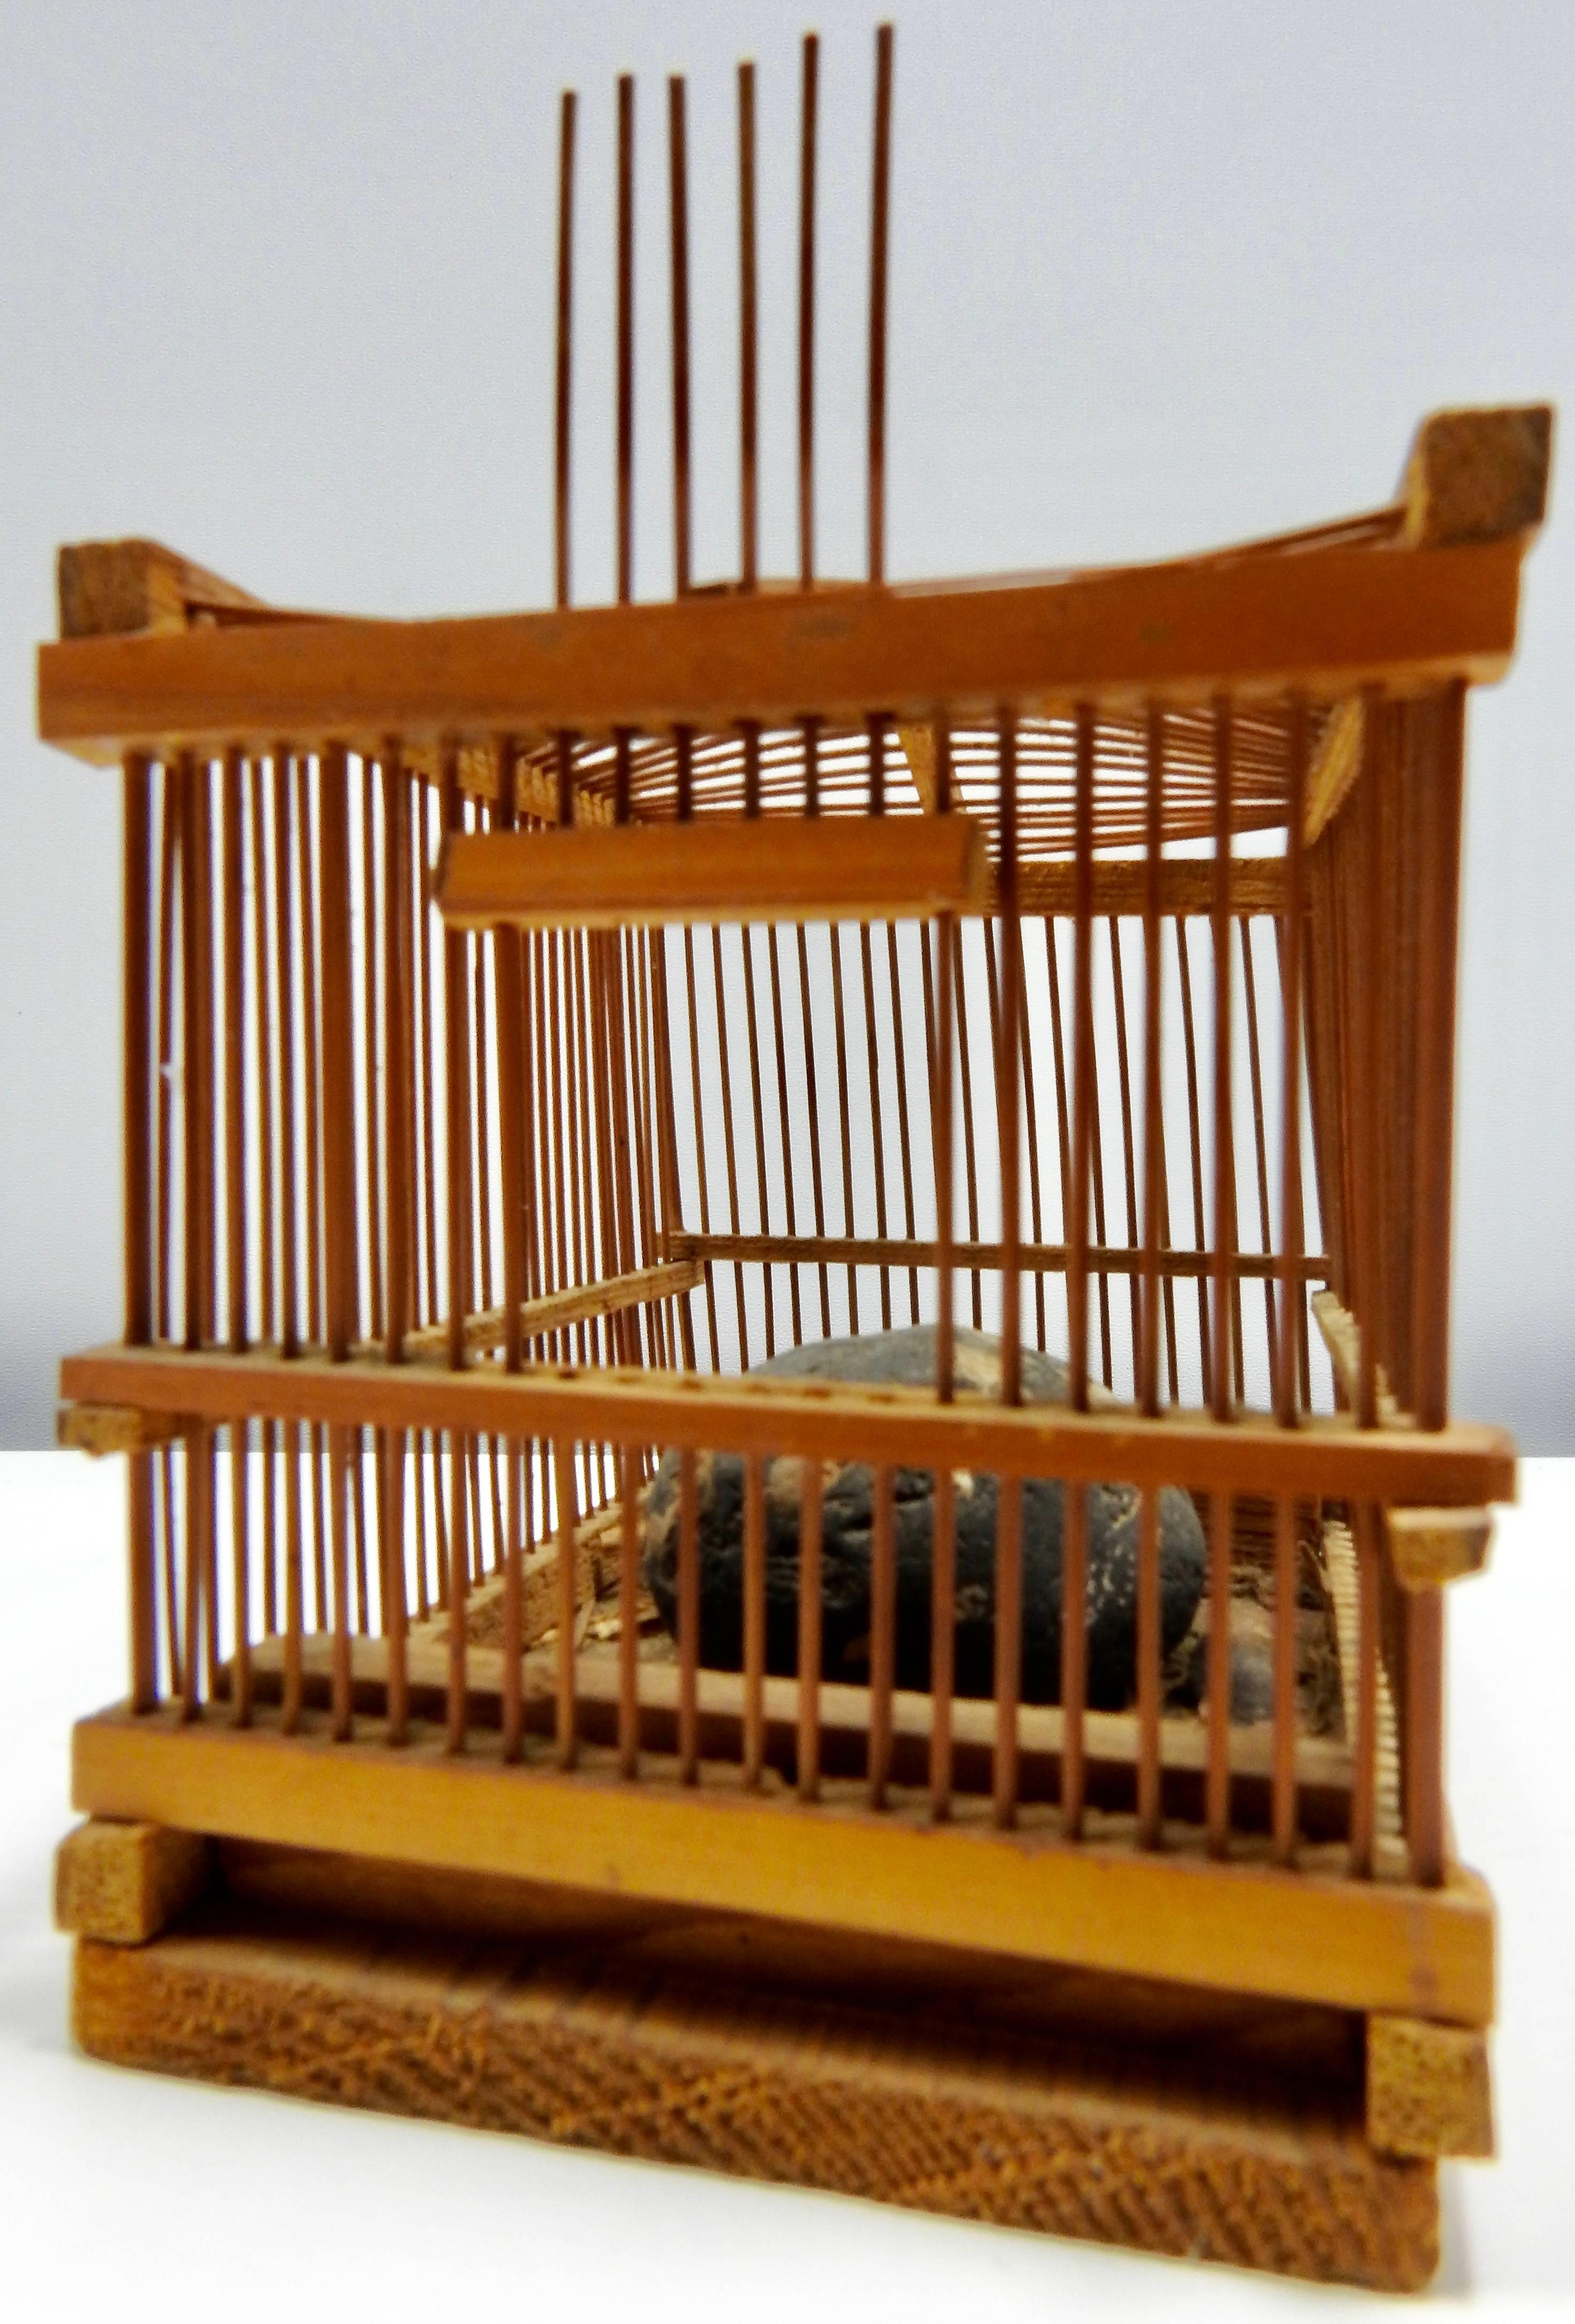 Your cricket can live in style in this antique cricket cage! There is a rock mounted on the inside with pieces of straw strewn about, one end has a section that can be raised up and the entire top section will come off.